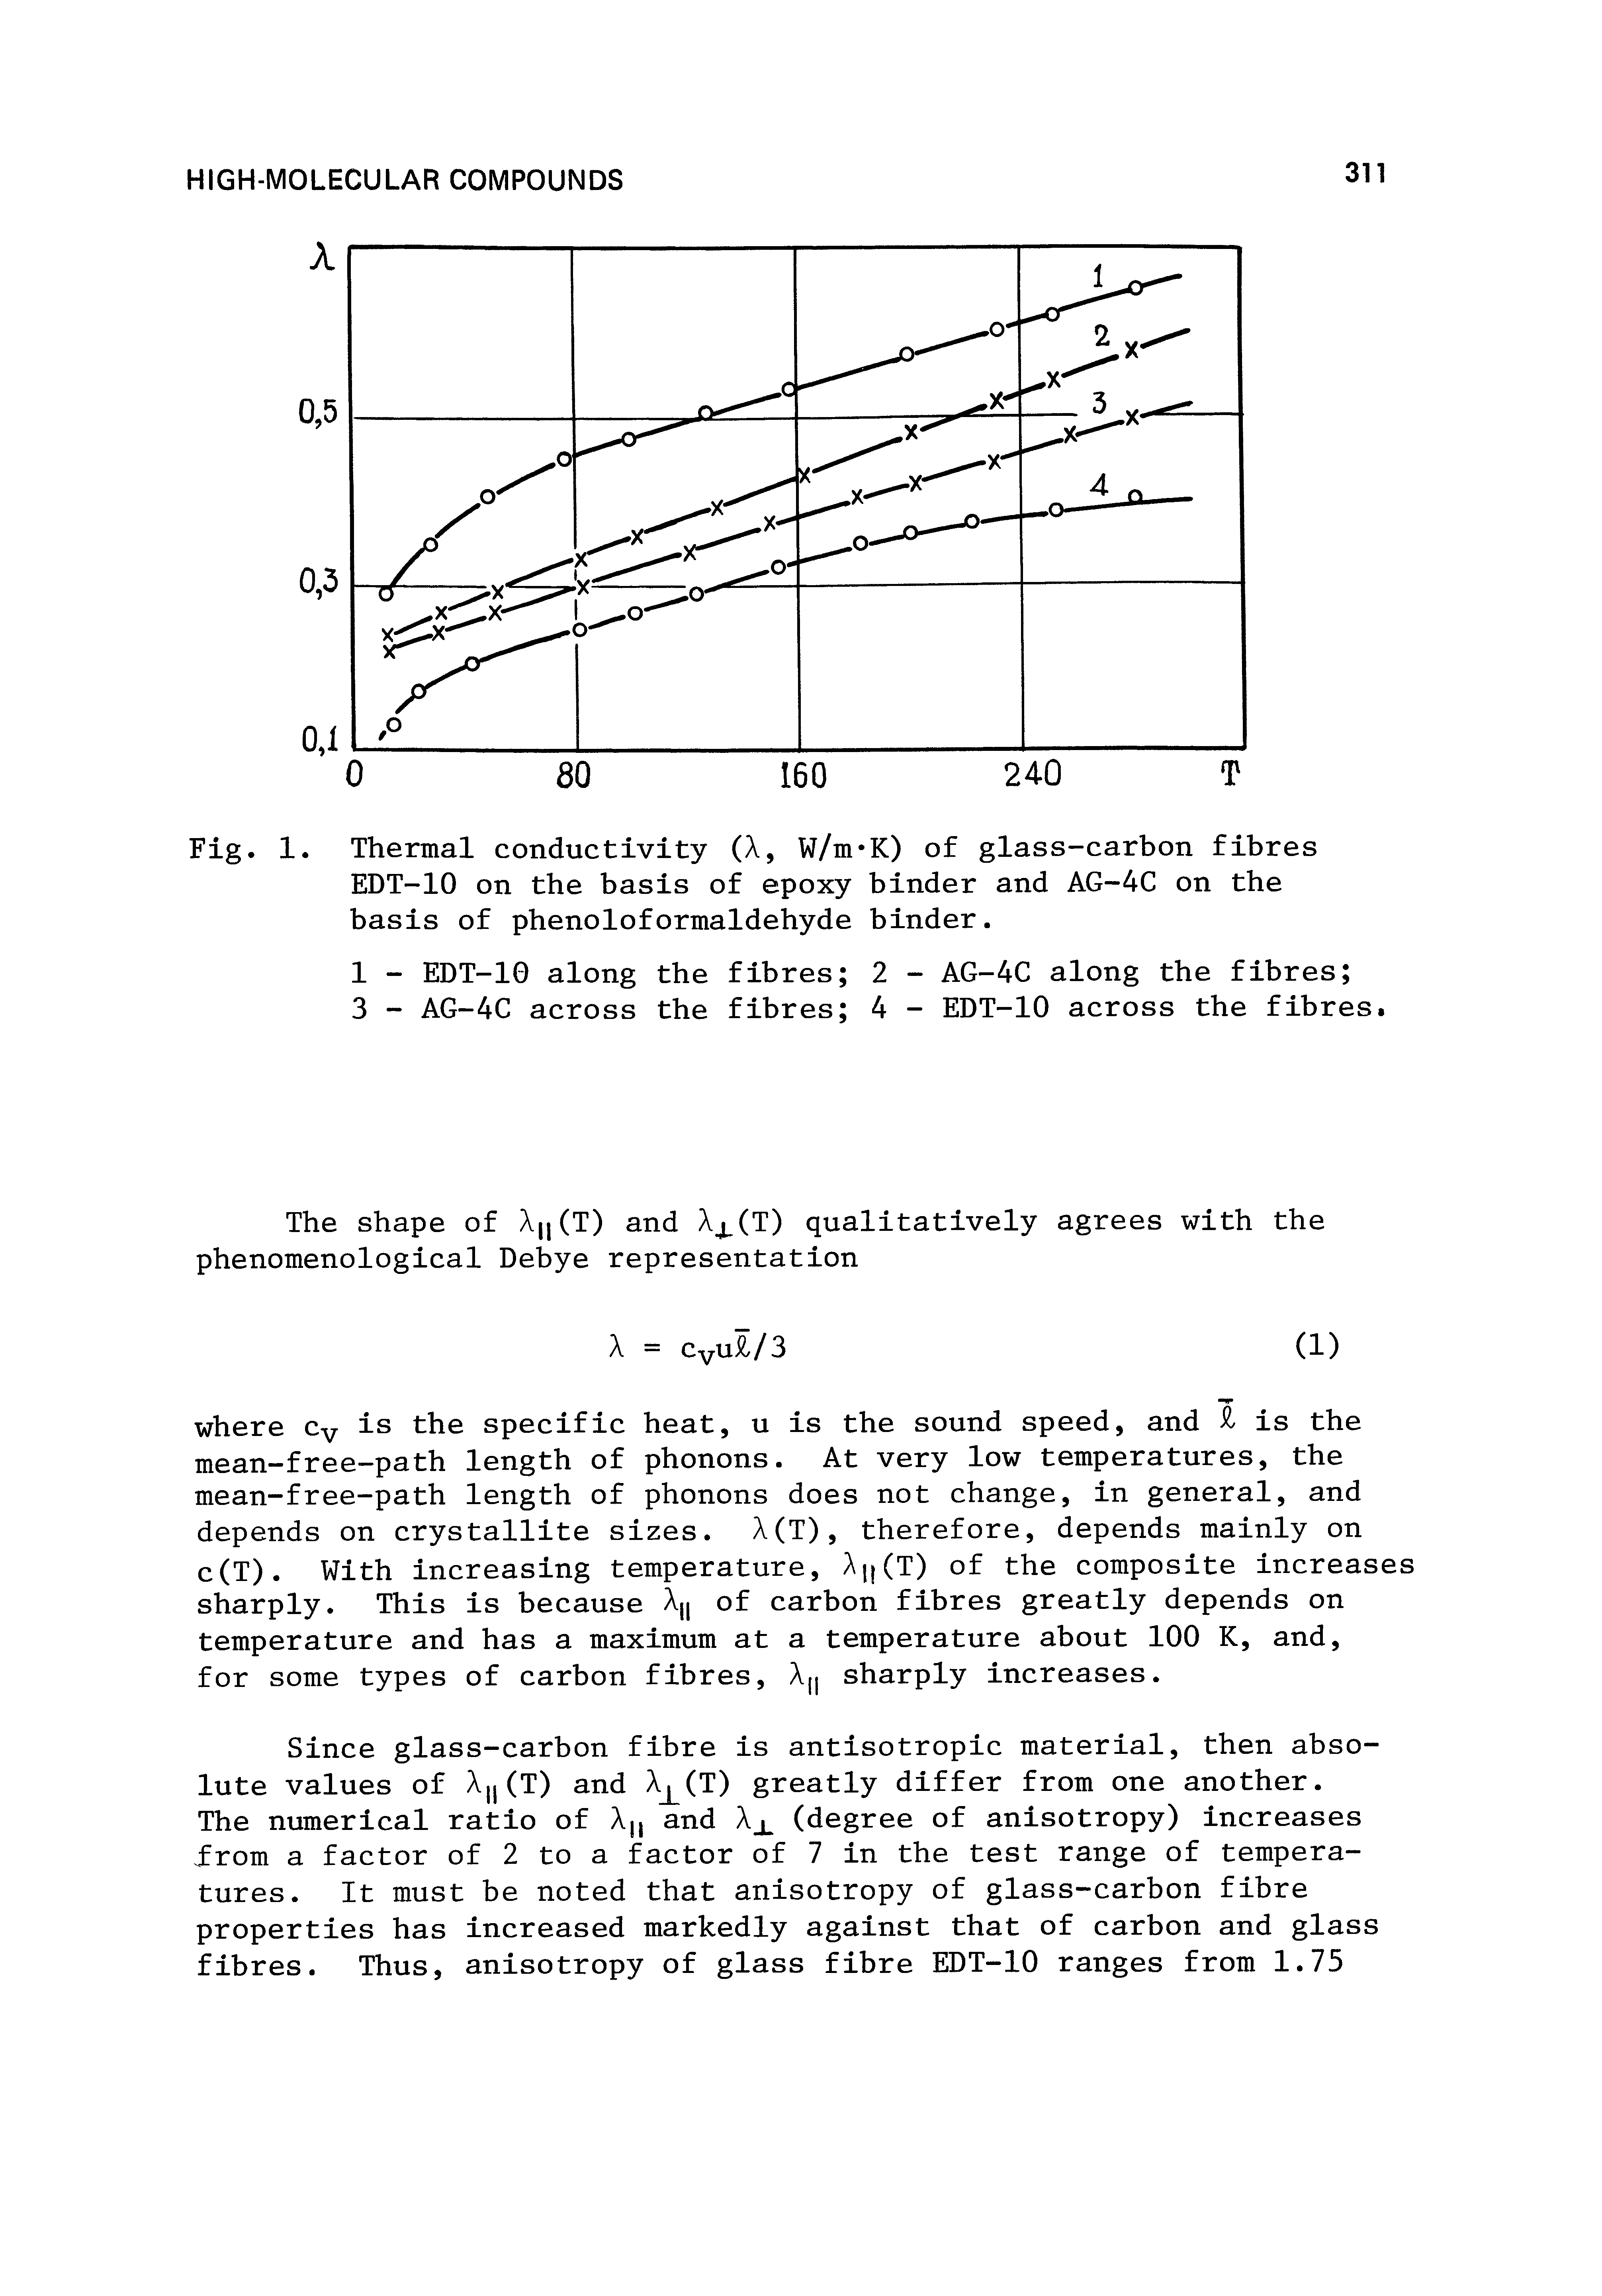 Fig. 1. Thermal conductivity (X, W/m K) of glass-carbon fibres EDT-10 on the basis of epoxy binder and AG-4C on the basis of phenoloformaldehyde binder.